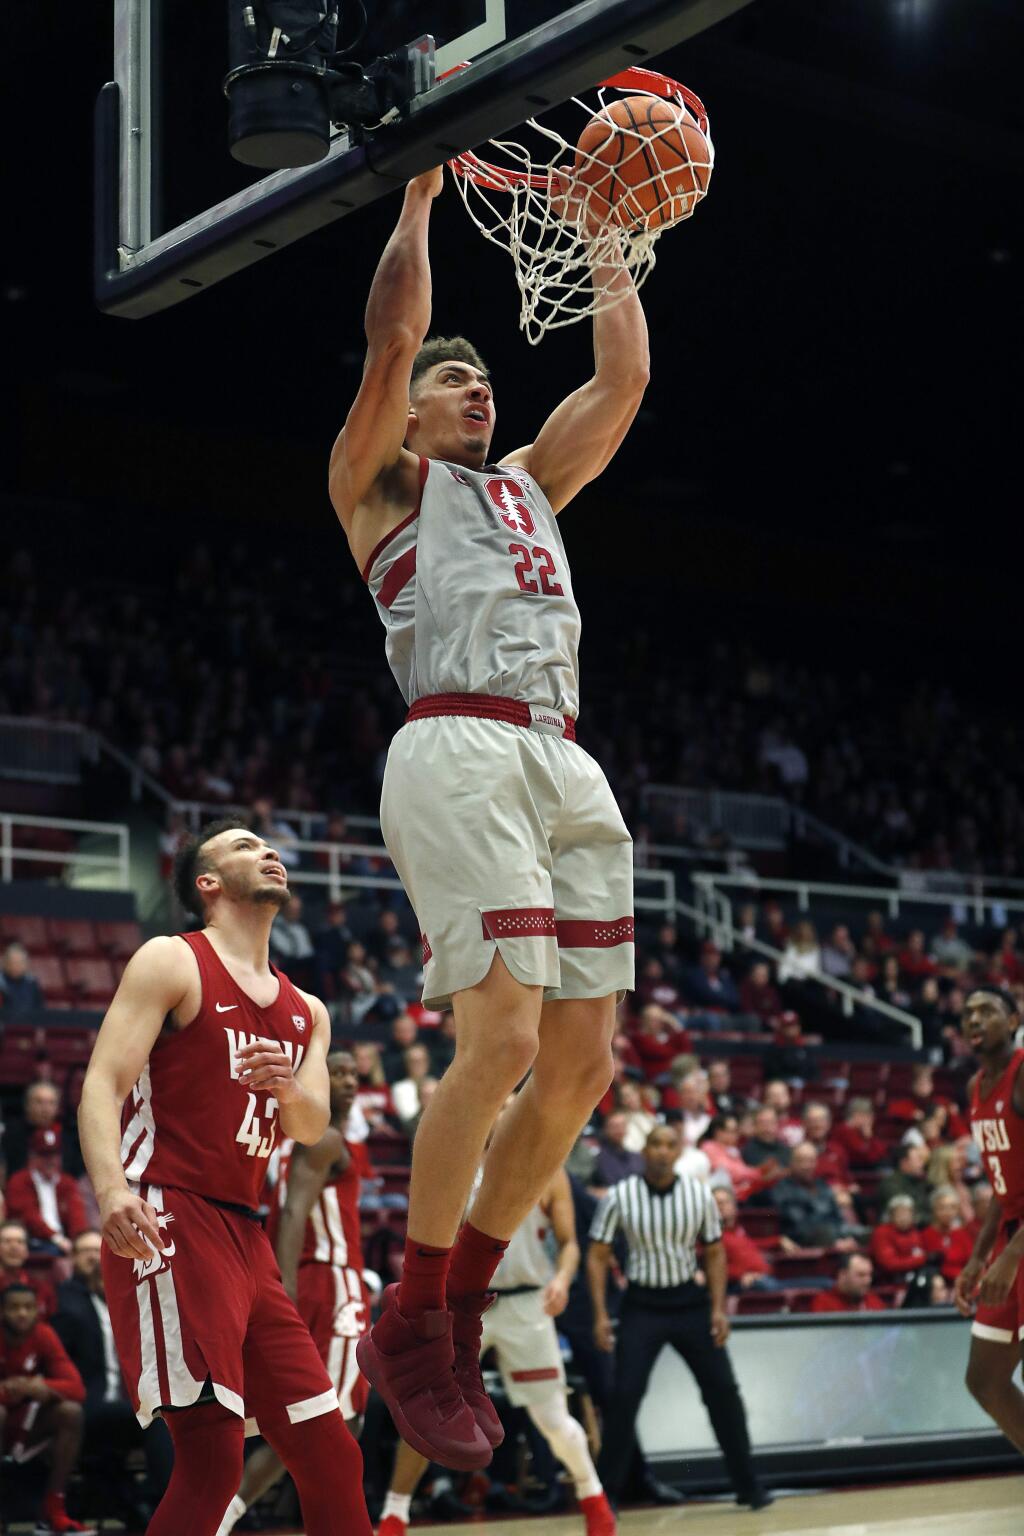 Stanford forward Reid Travis (22) dunks against Washington State during the first half of an NCAA college basketball game Saturday, Feb. 24, 2018, in Stanford, Calif. (AP Photo/Tony Avelar)